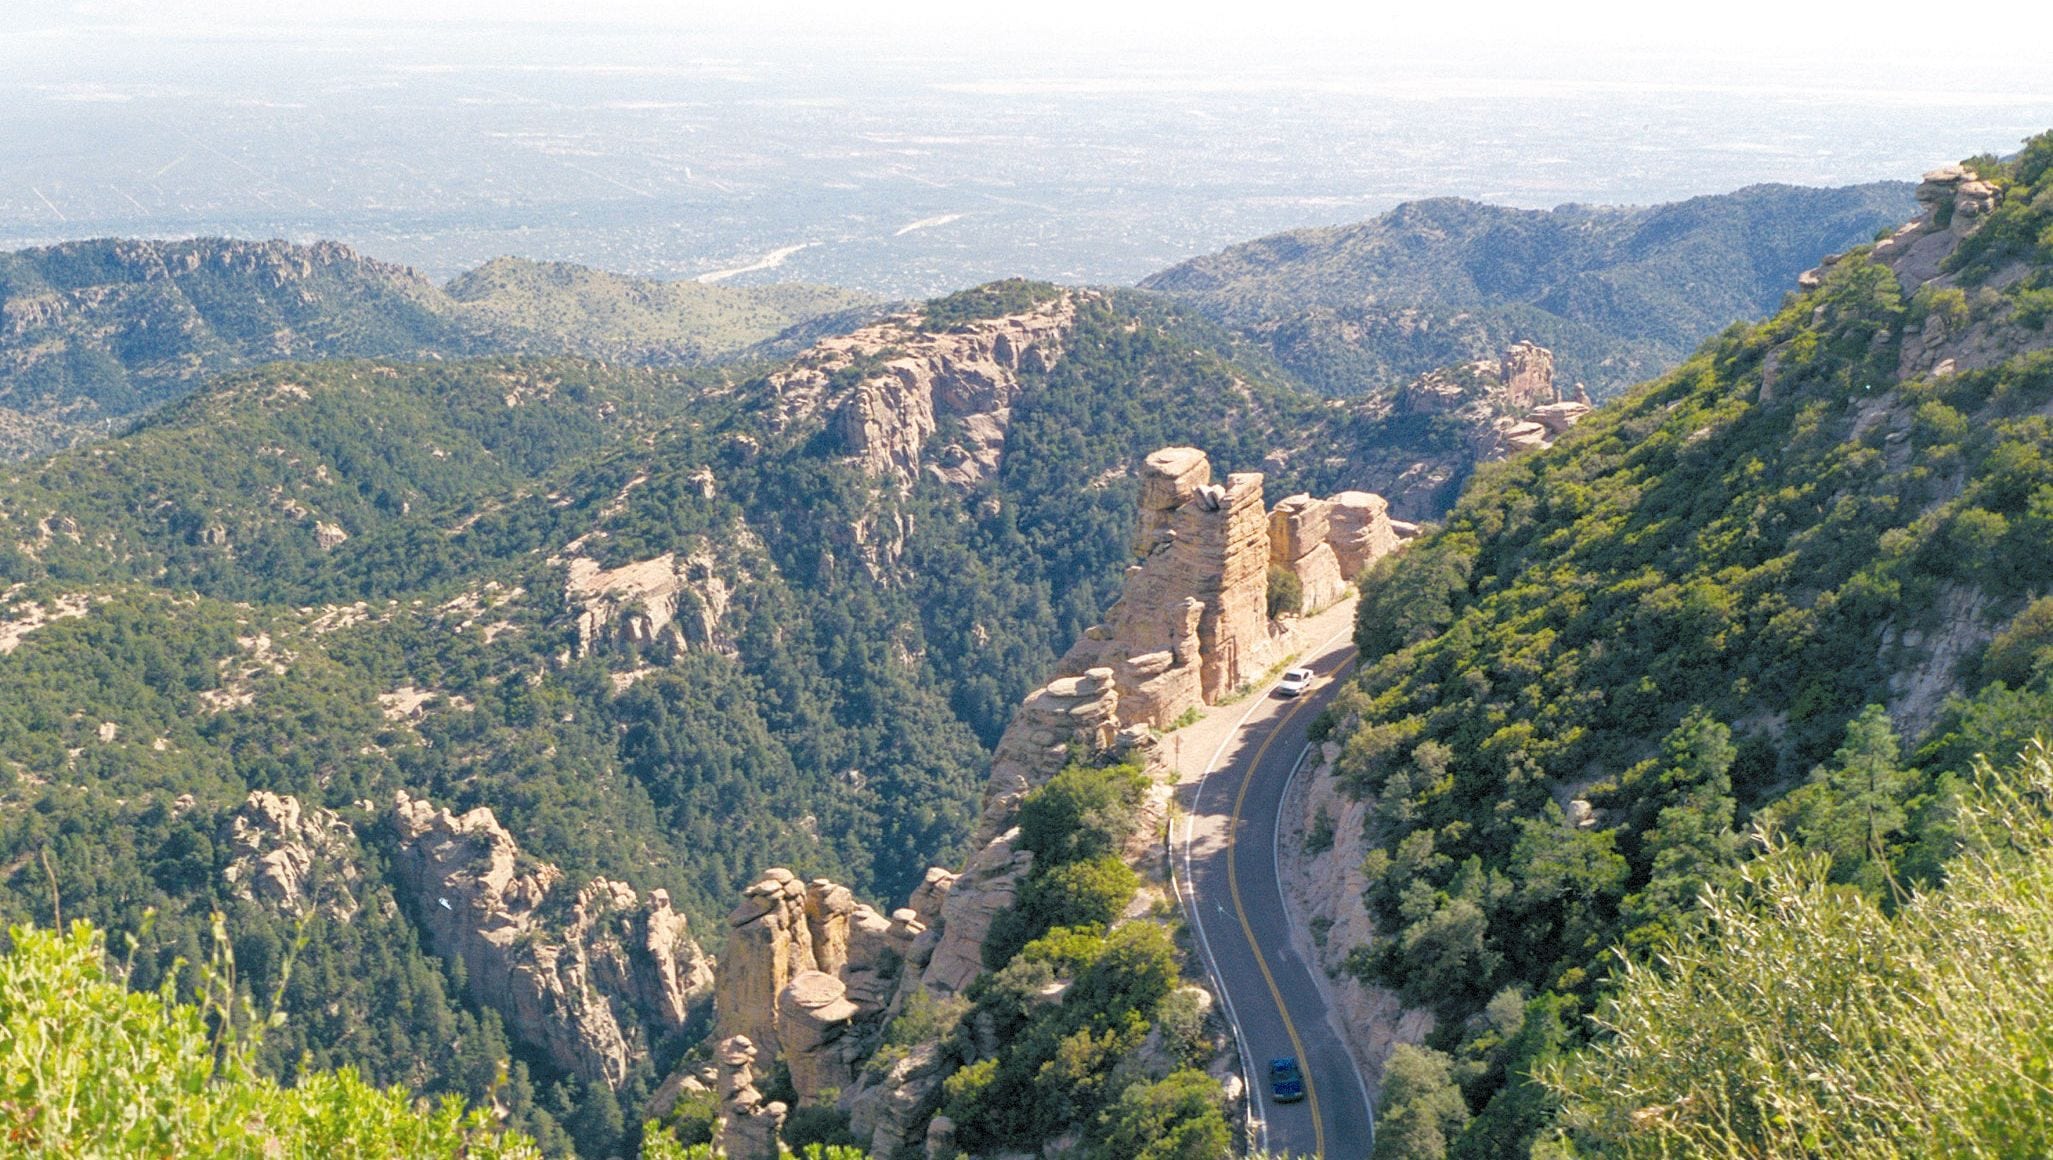 Mt Lemmon just a few miles from Tucson AZ is a great day trip